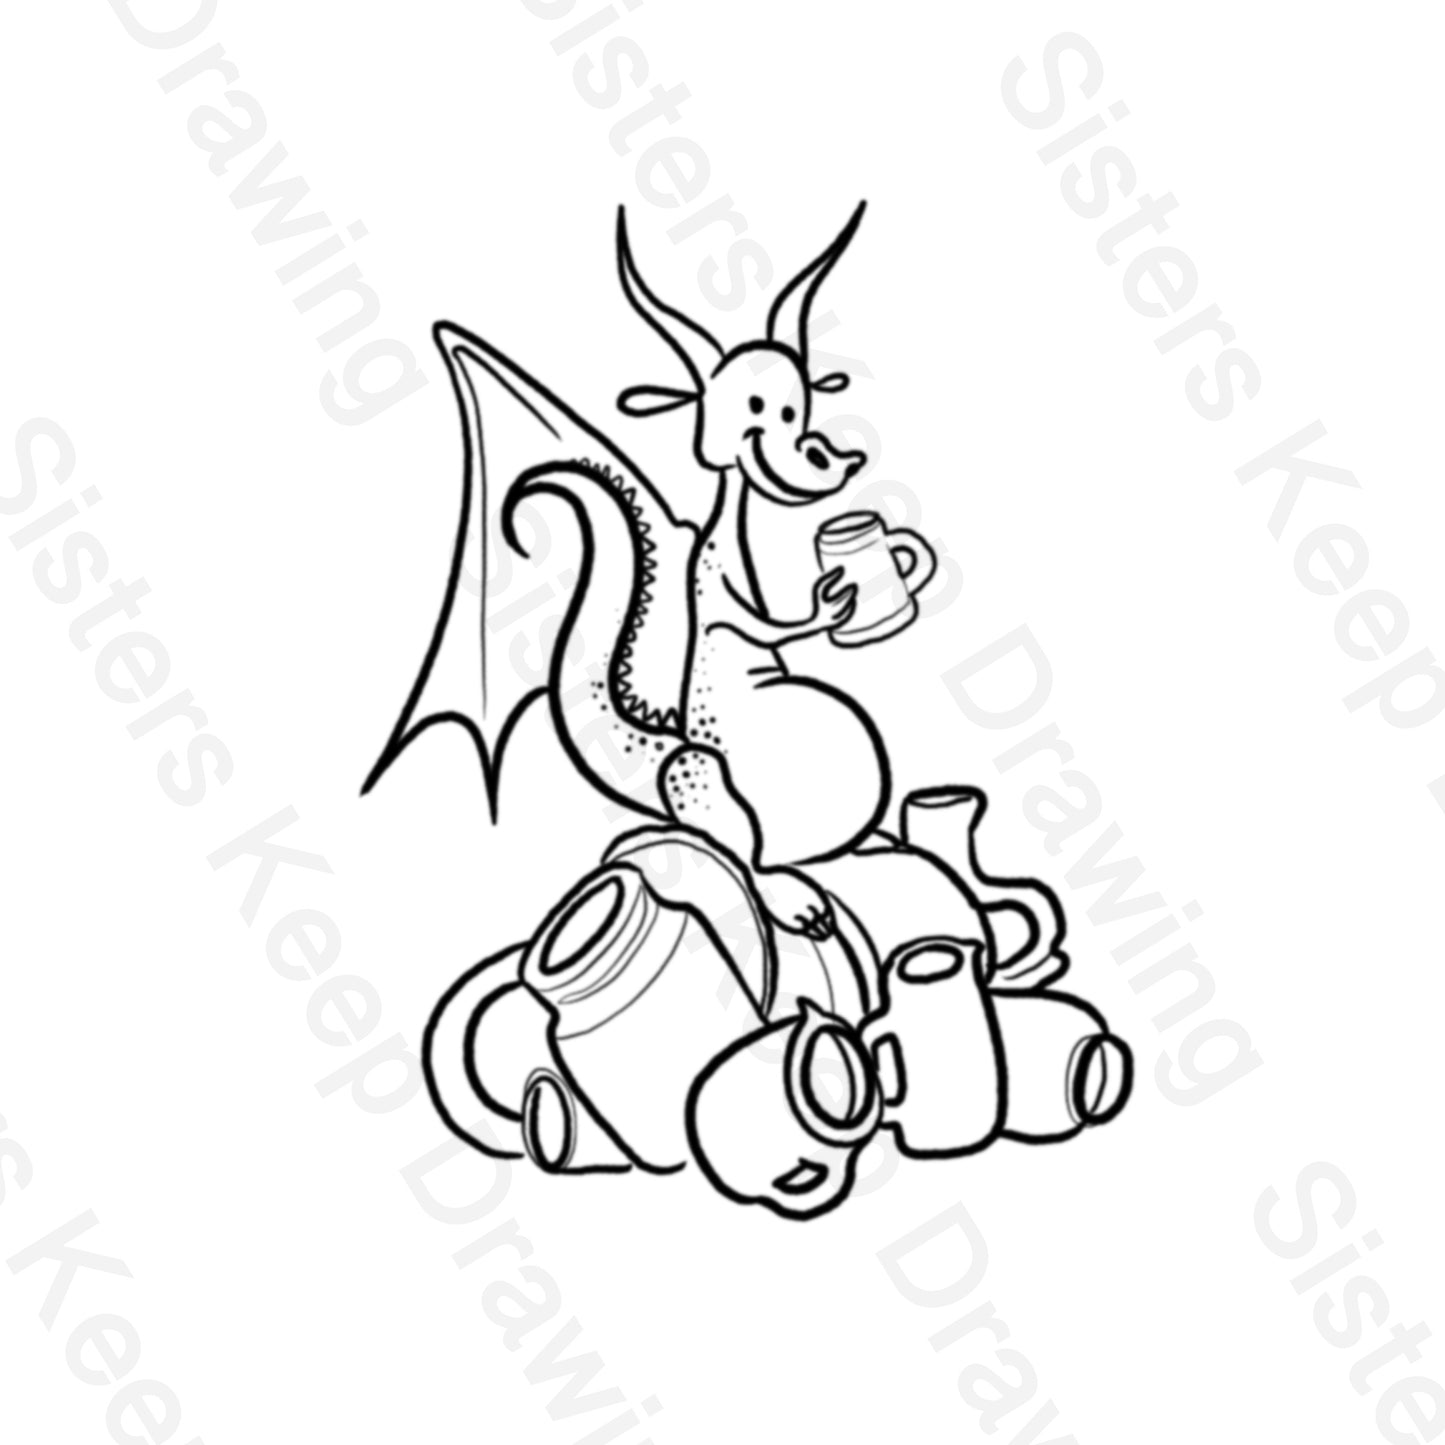 Tiny Dragon with Pottery  - Tattoo Transparent Permission PNG- instant download digital printable artwork